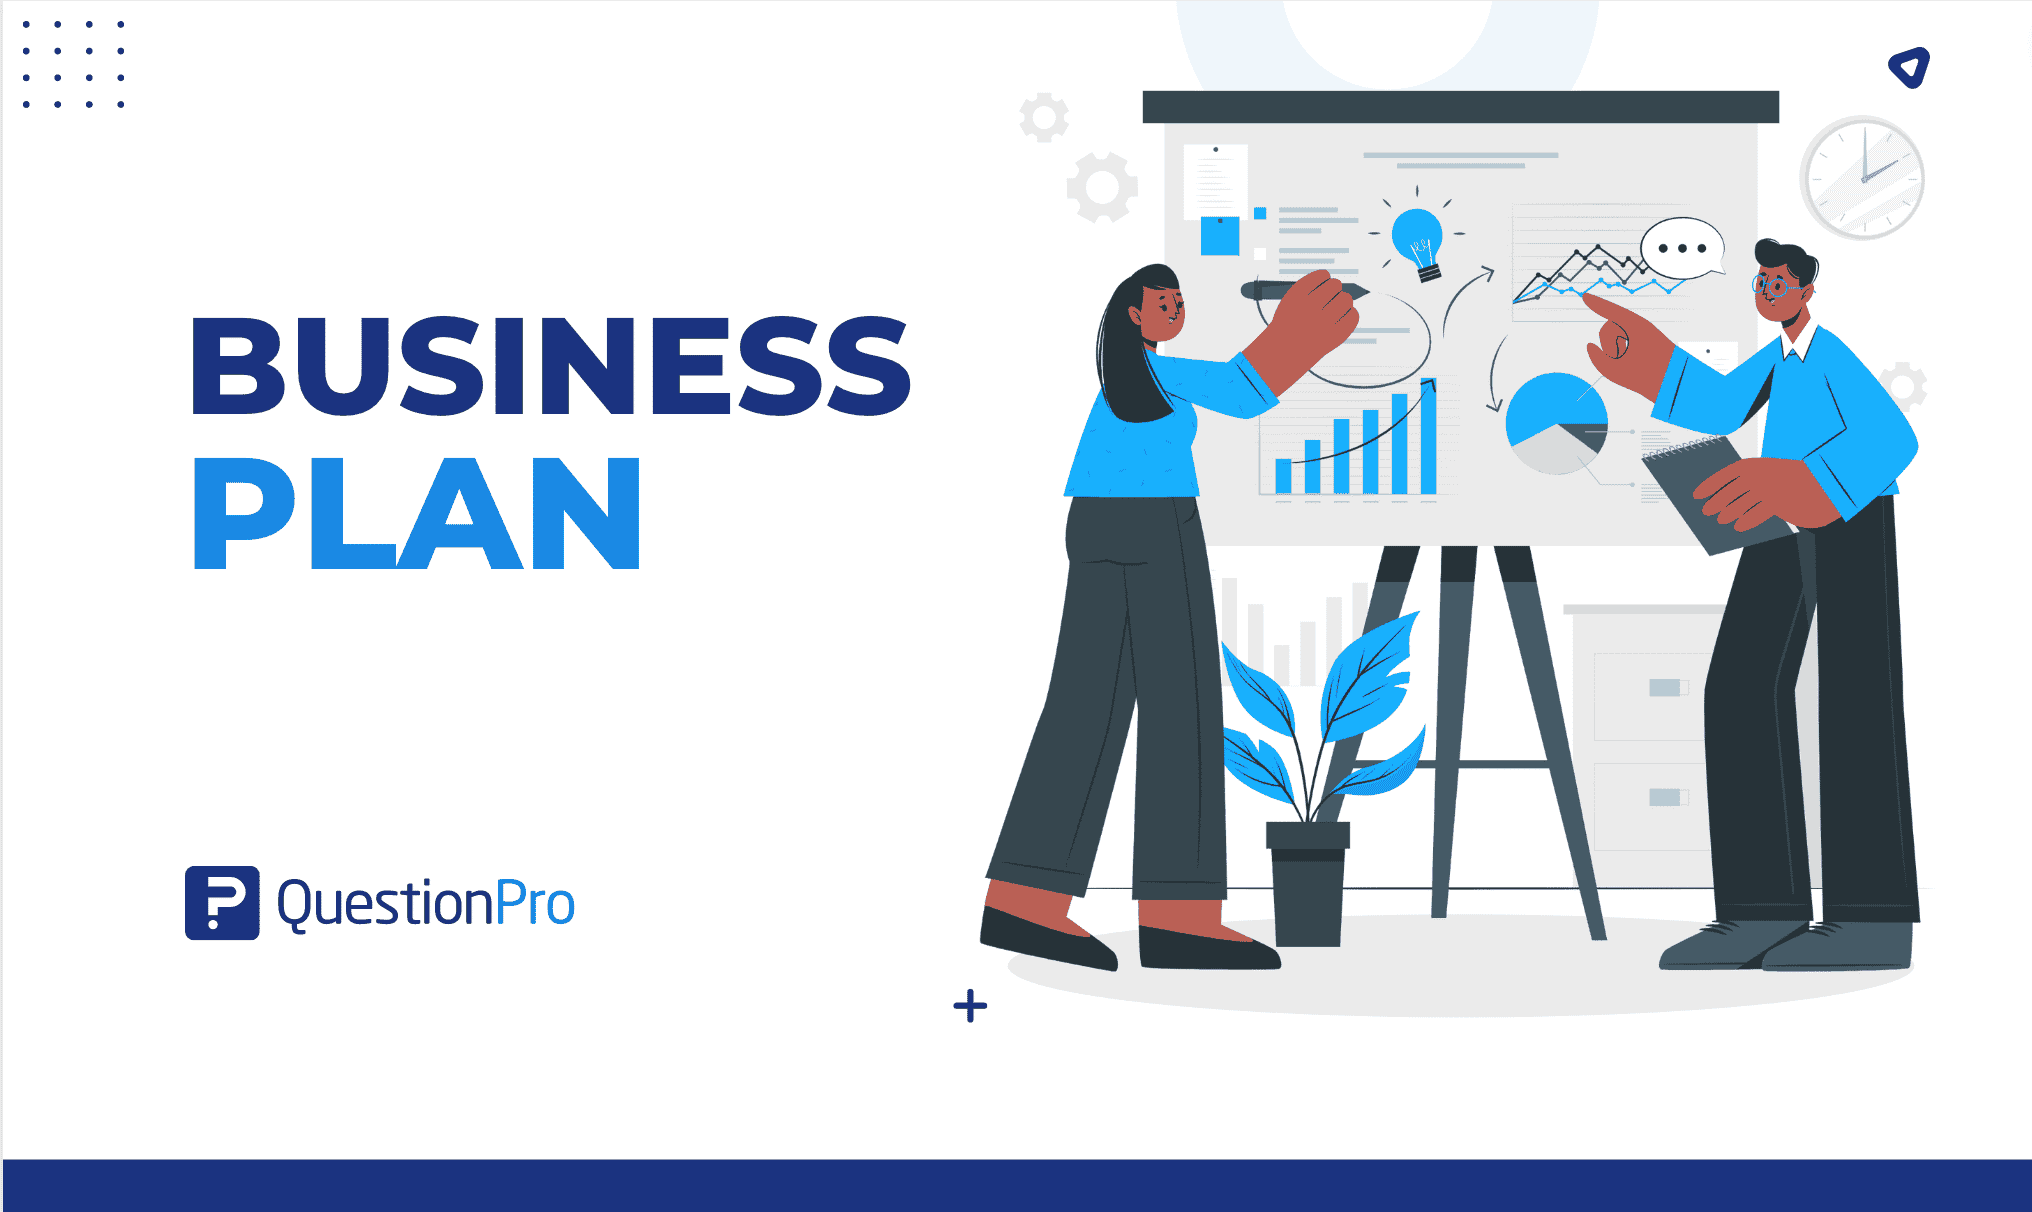 find the meaning of business plan